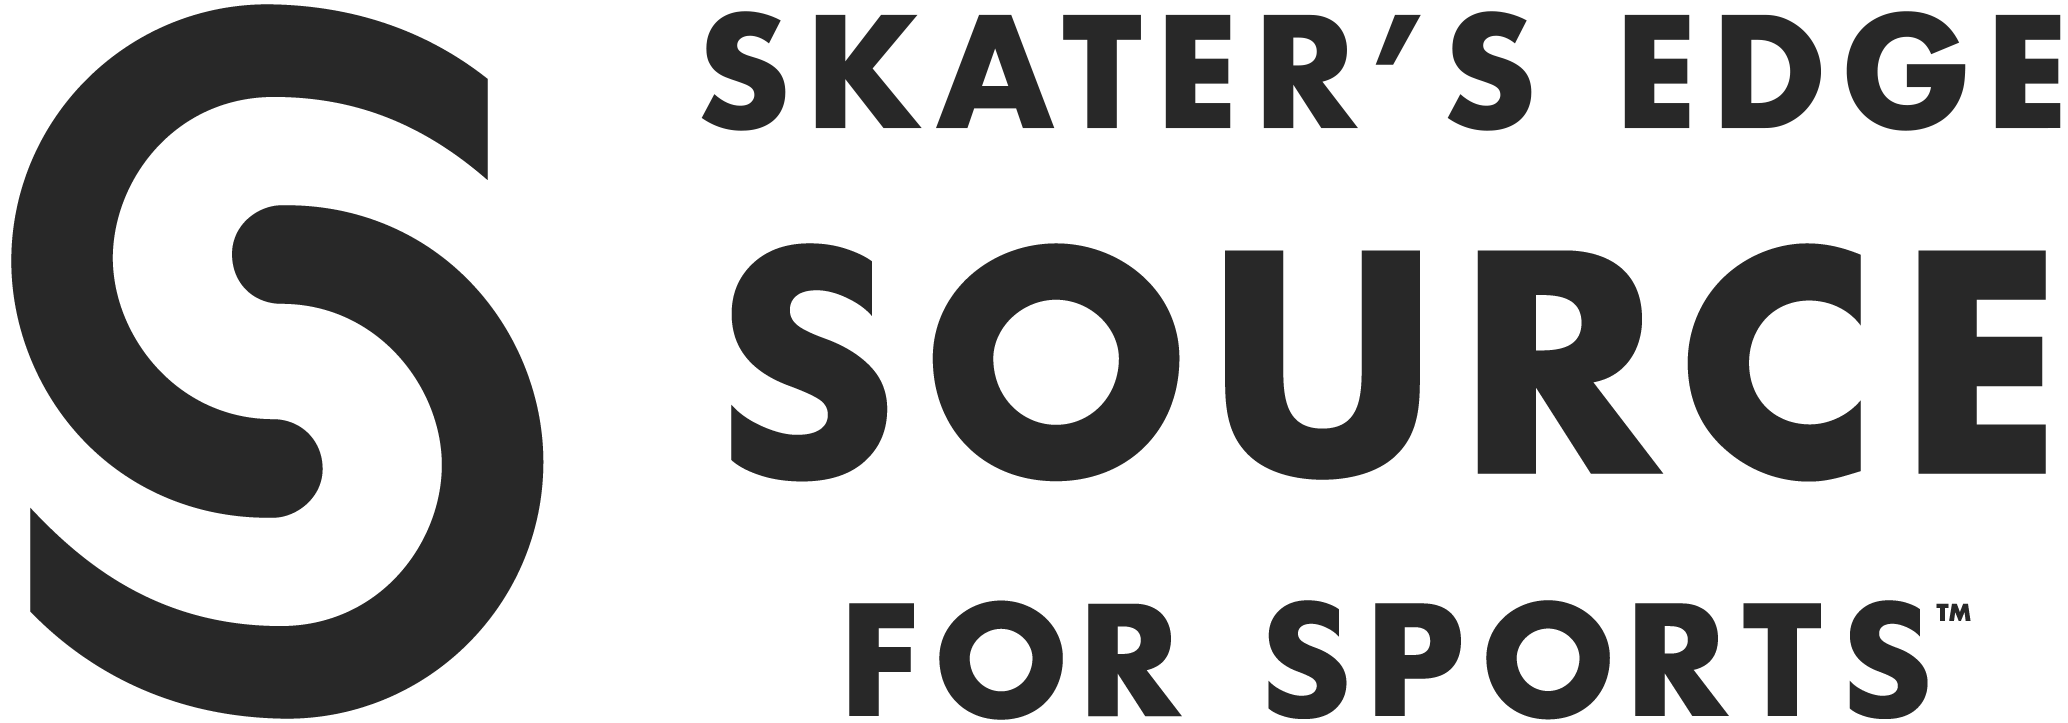 Source for Sports Skater's Edge Canada